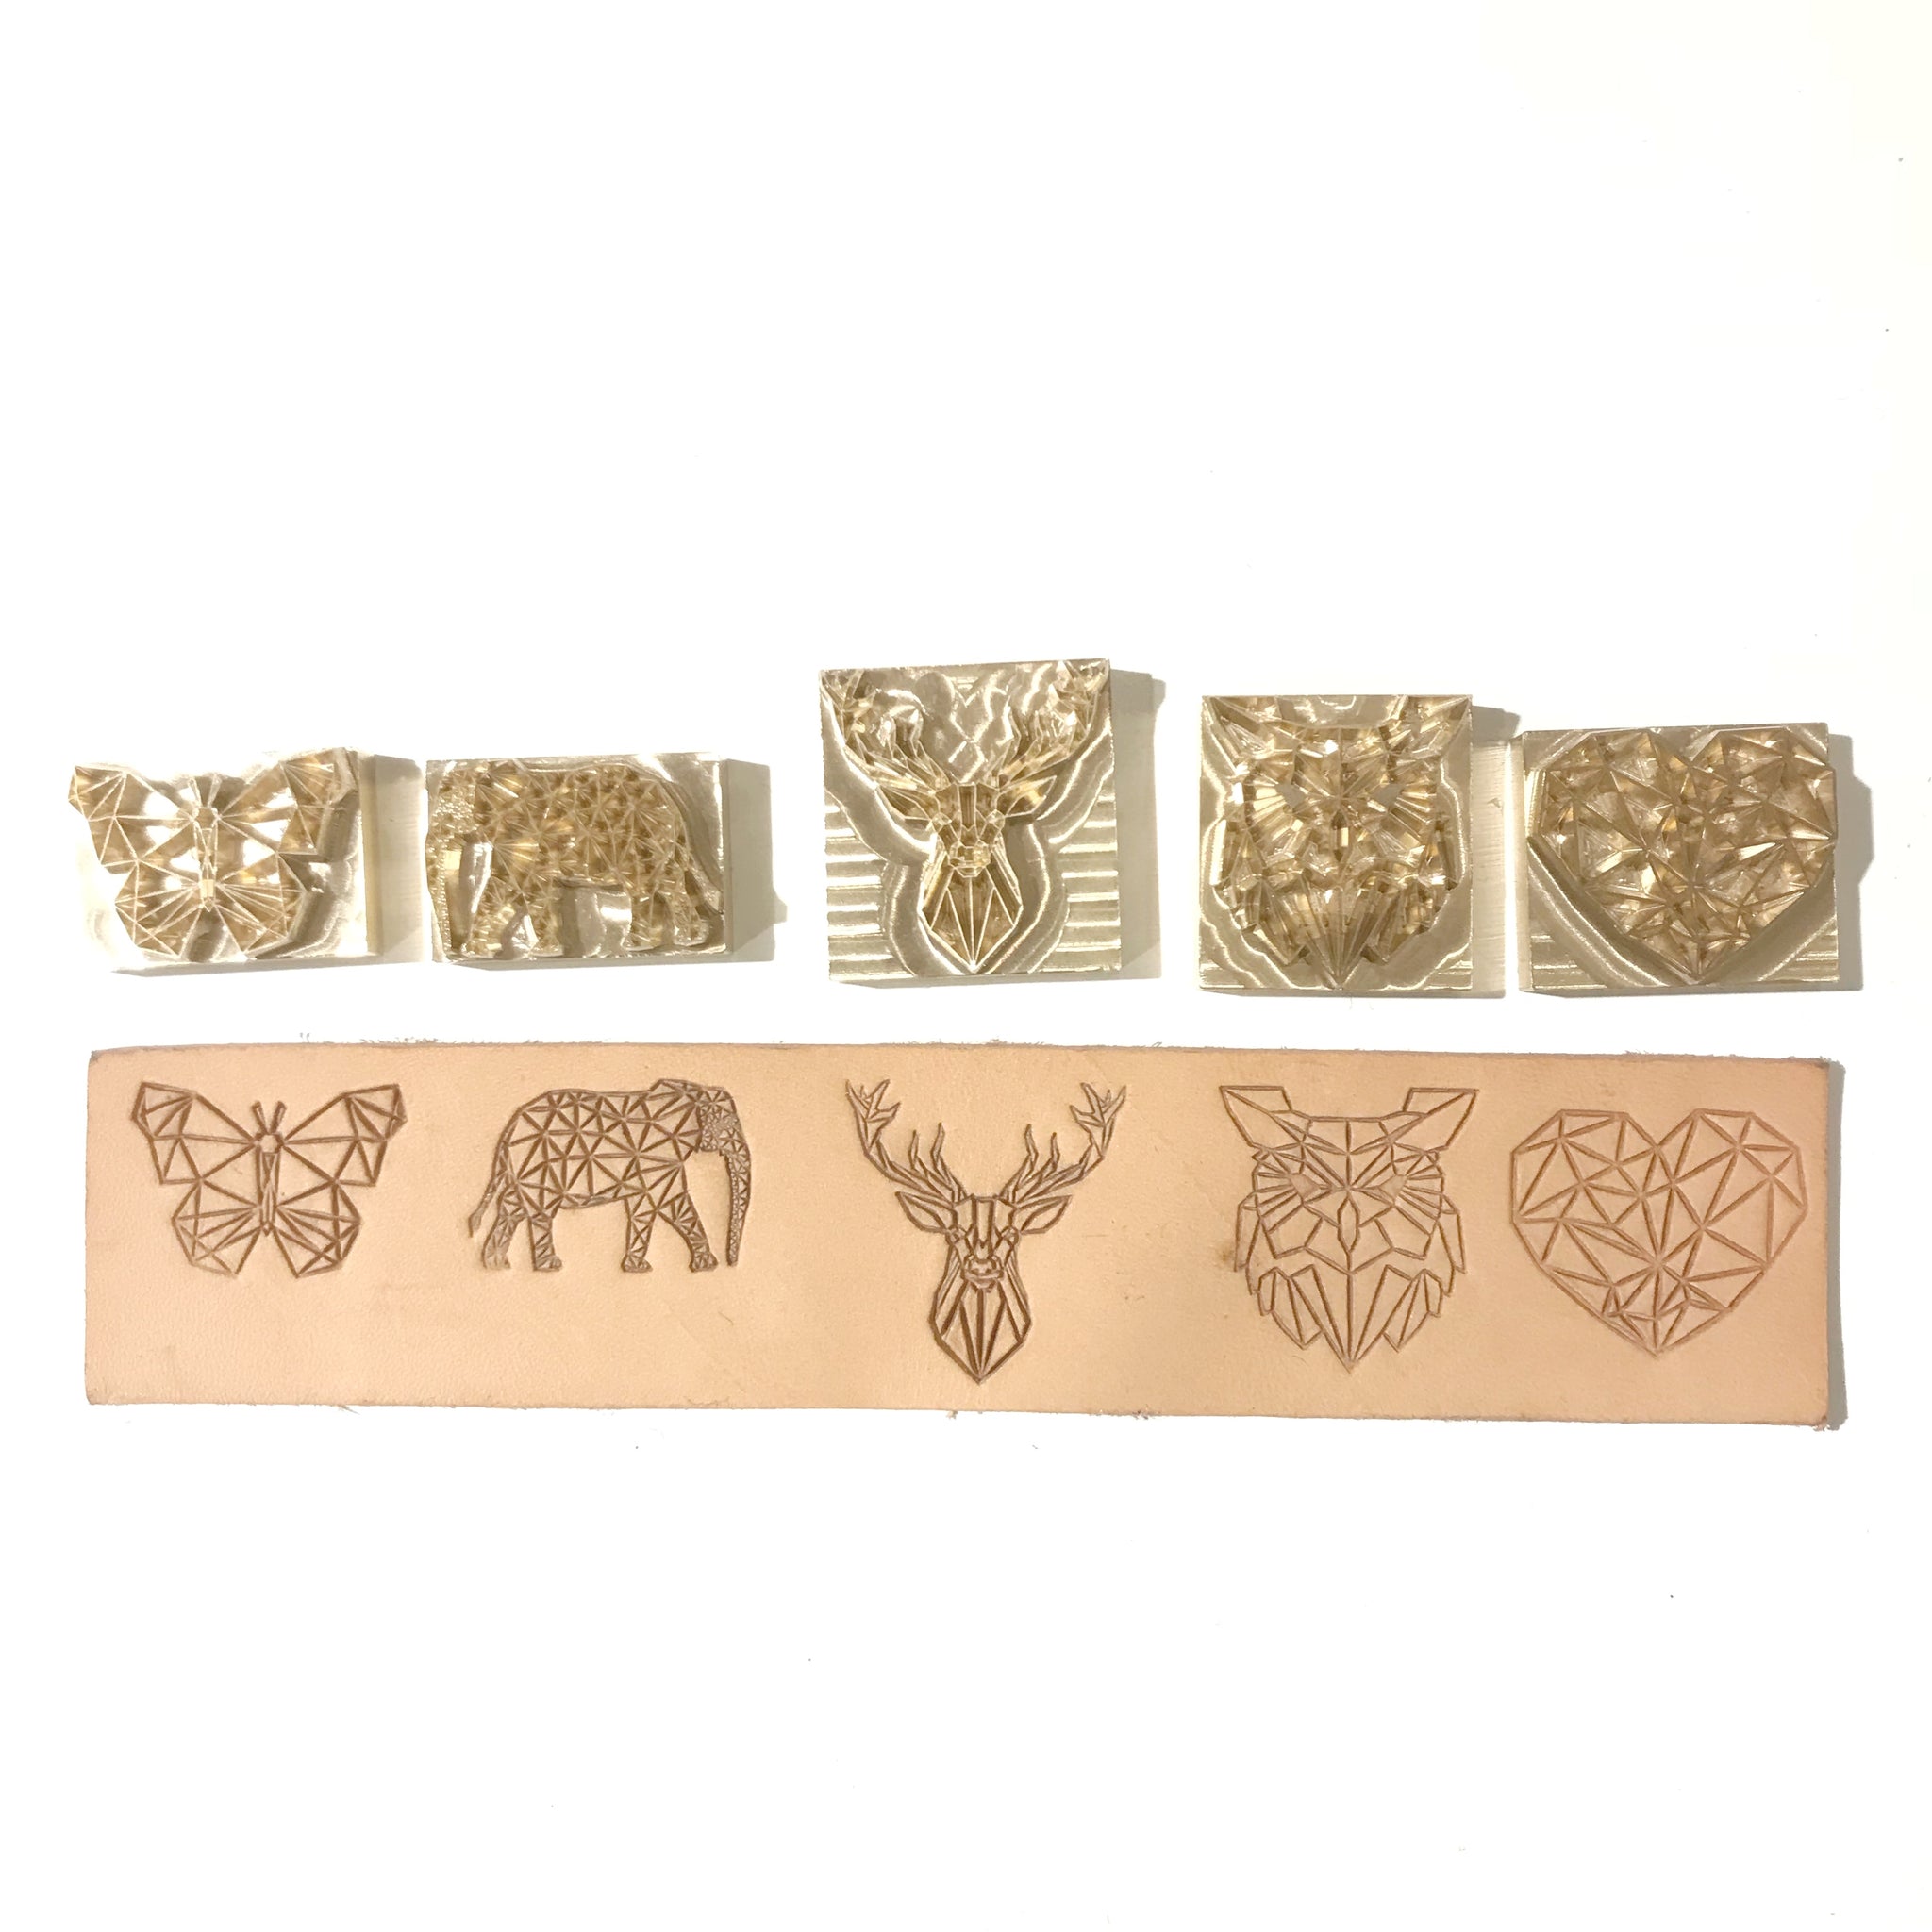 Custom Leather Stamp or Leather Embossing Die Large Size 